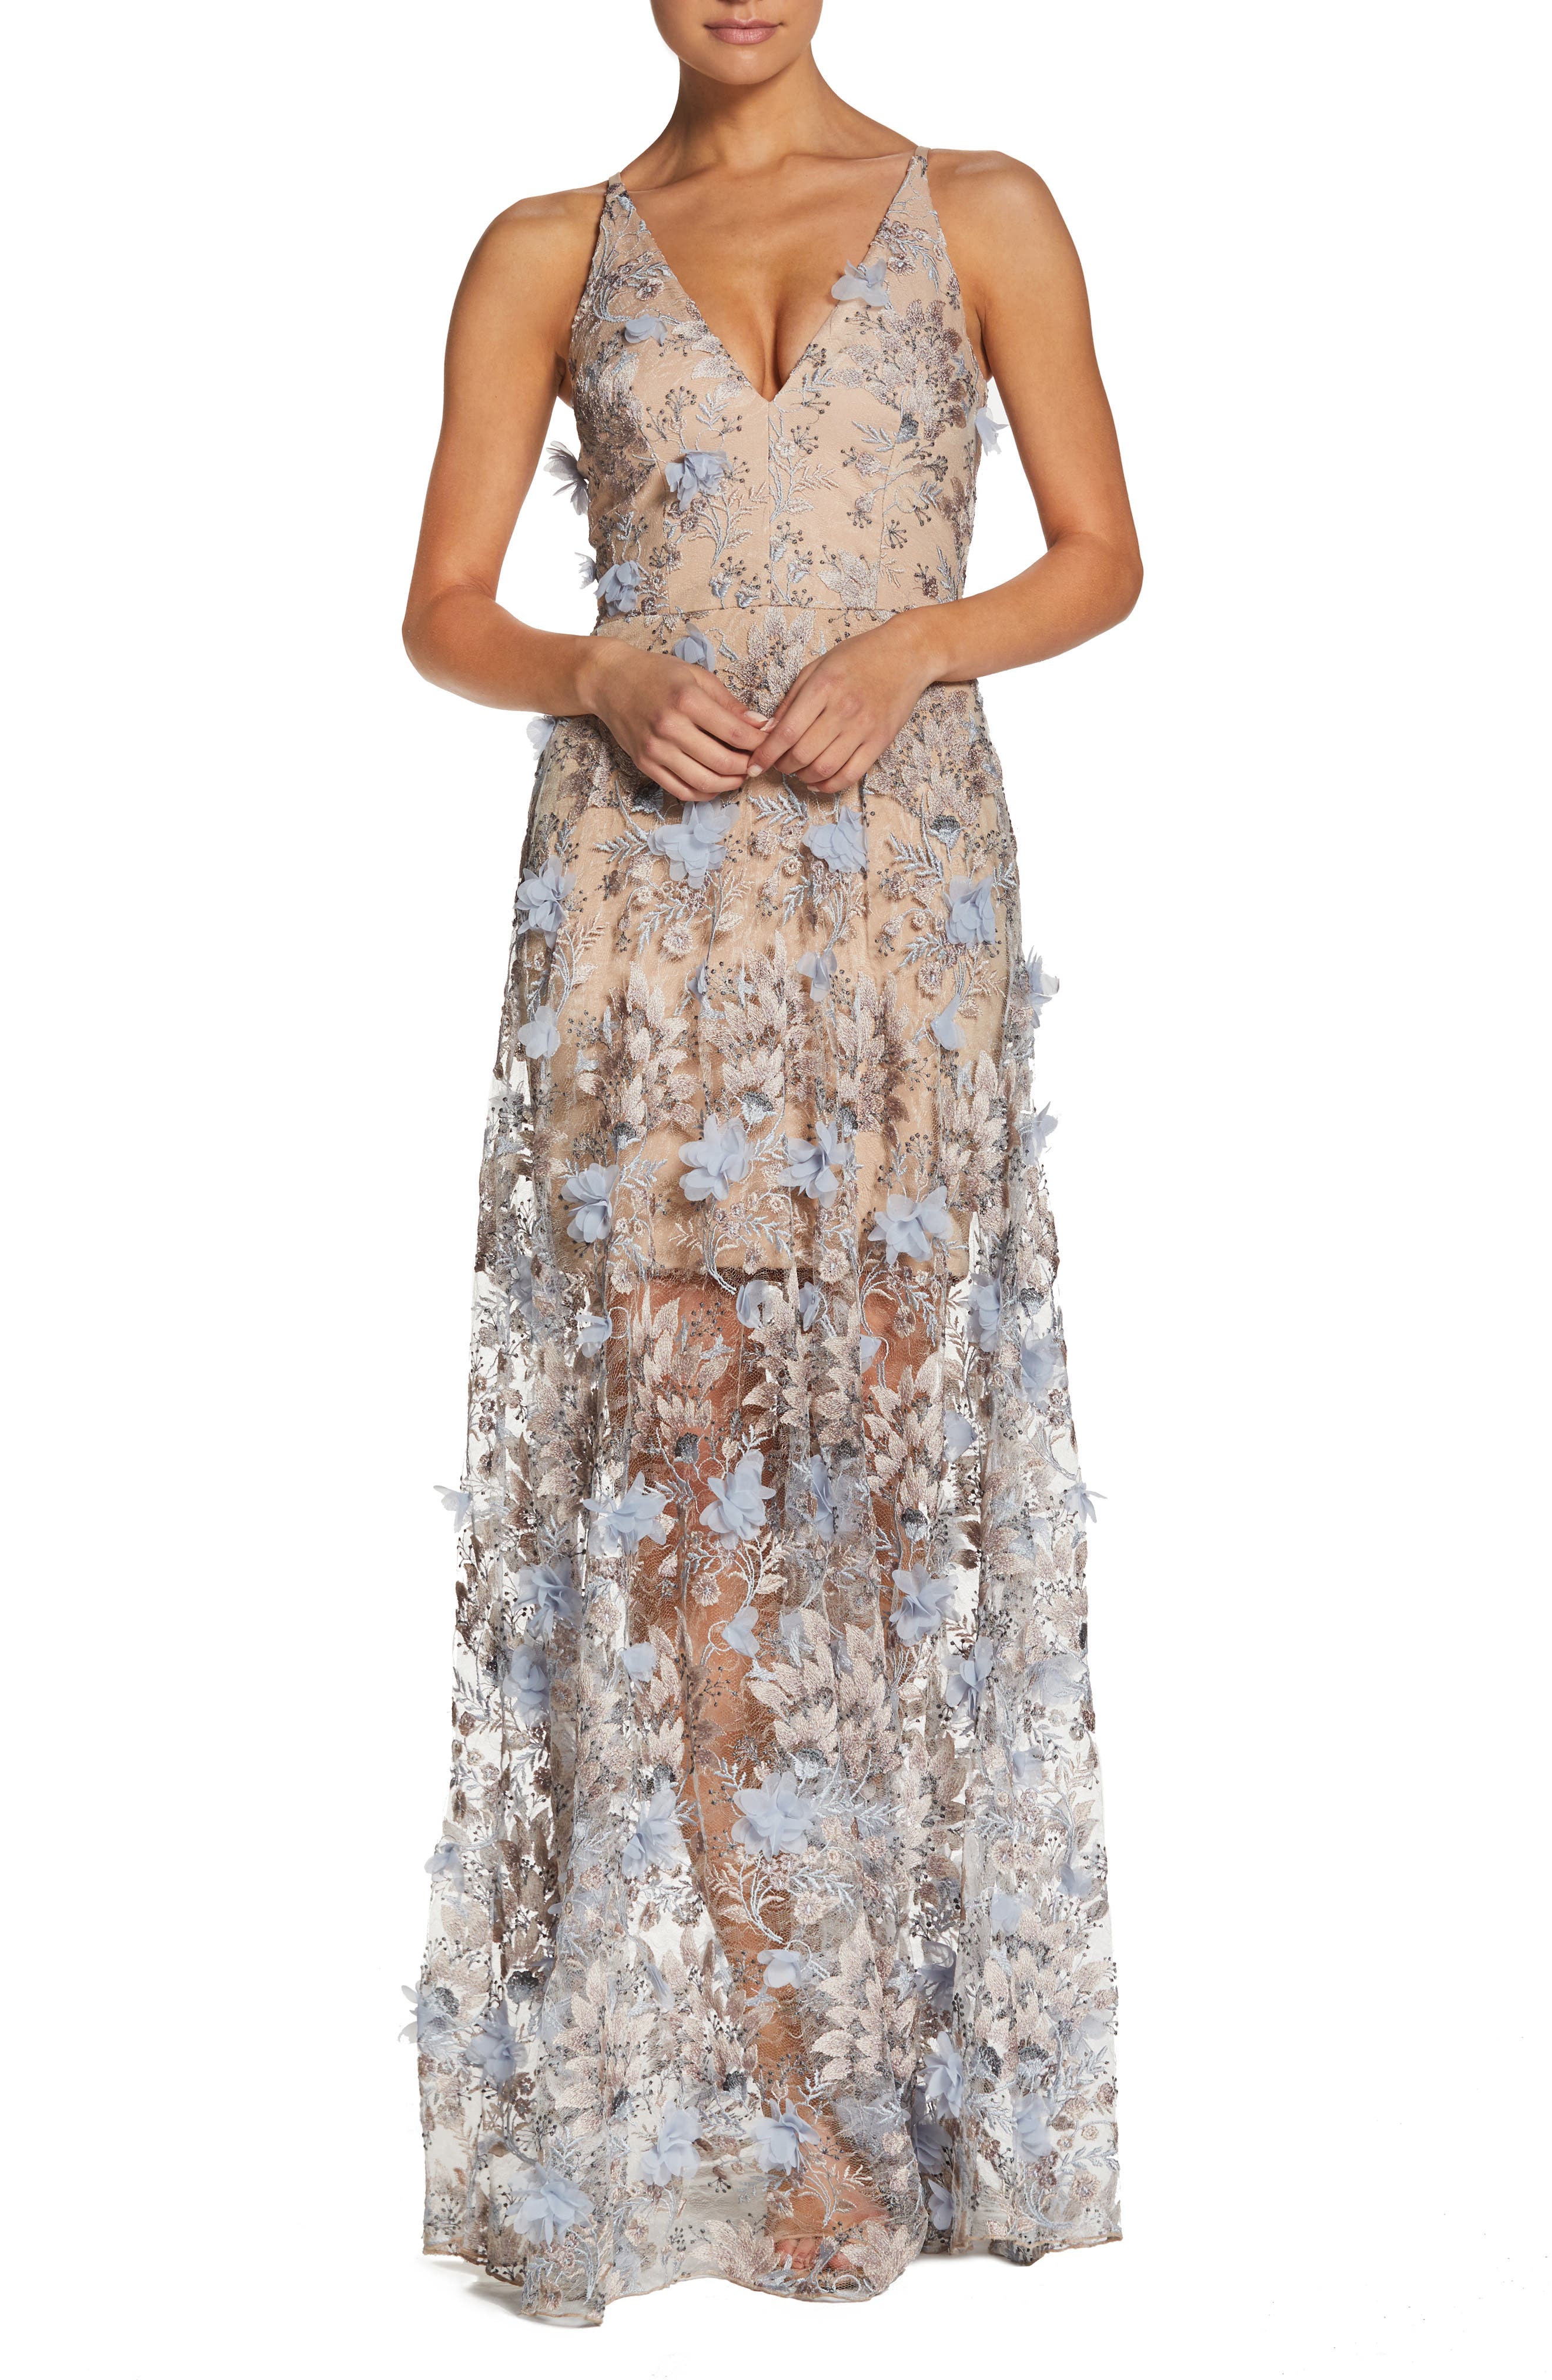 dress the population sidney lace gown